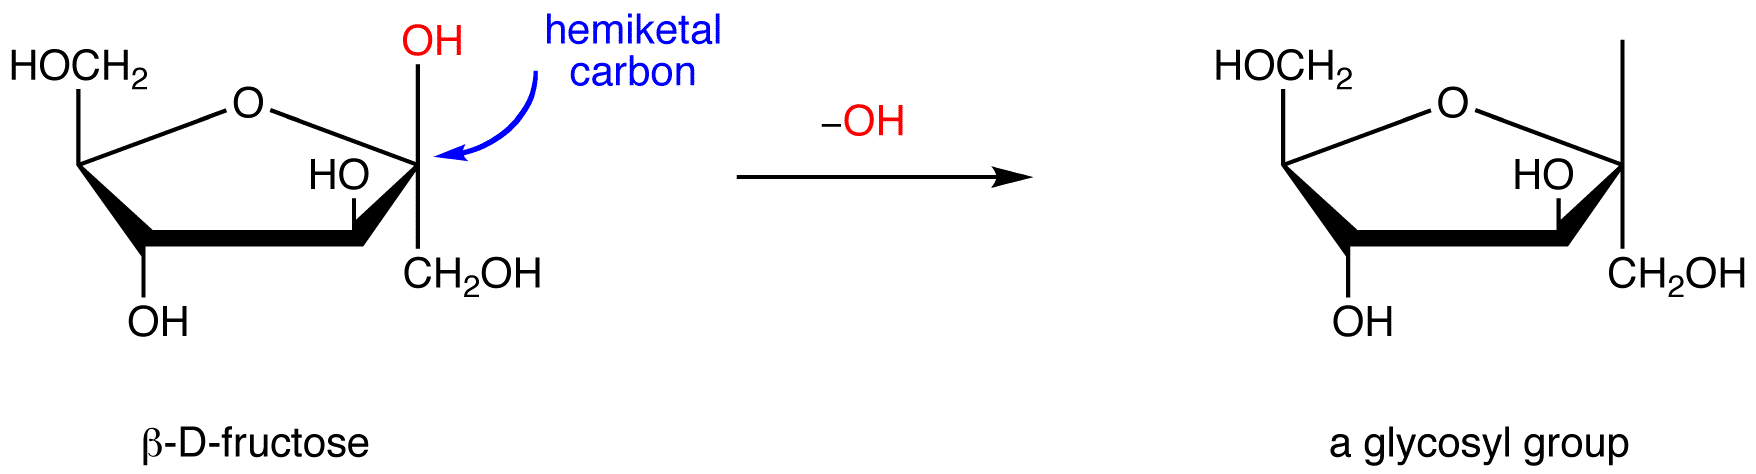 glycosylgroup2.png